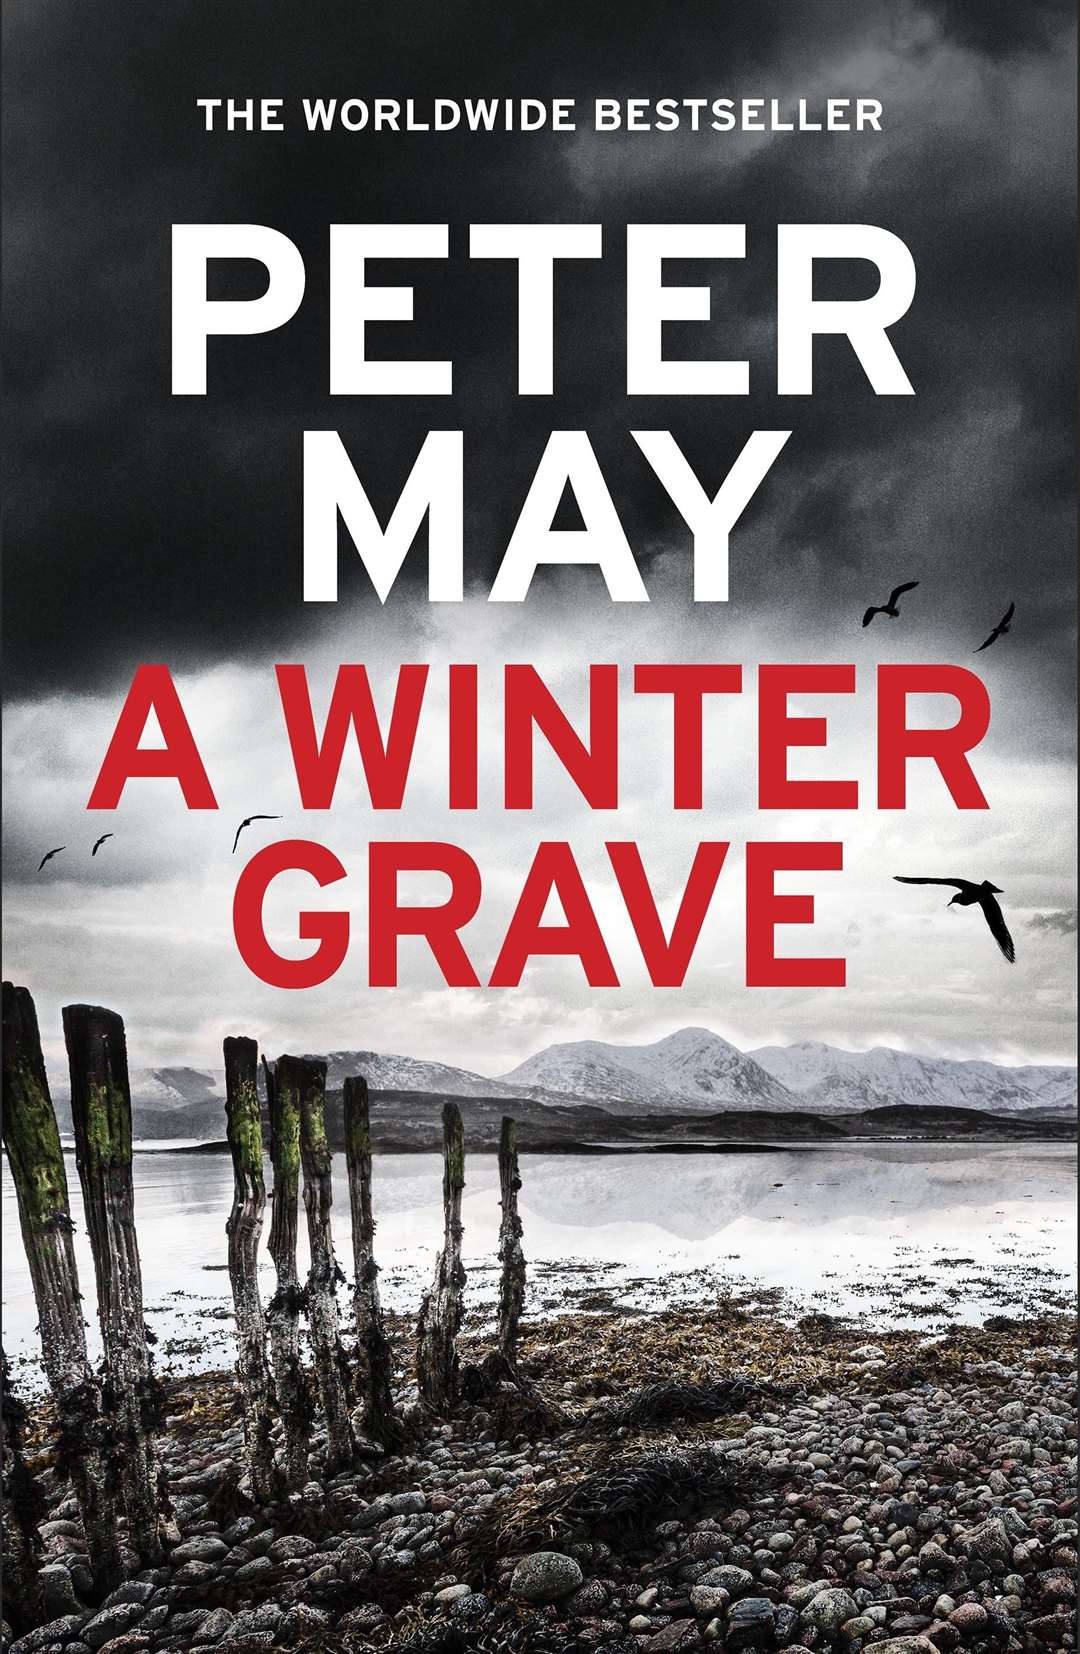 The new book, Peter May's A Winter Grave is set in a world affected by climate change.